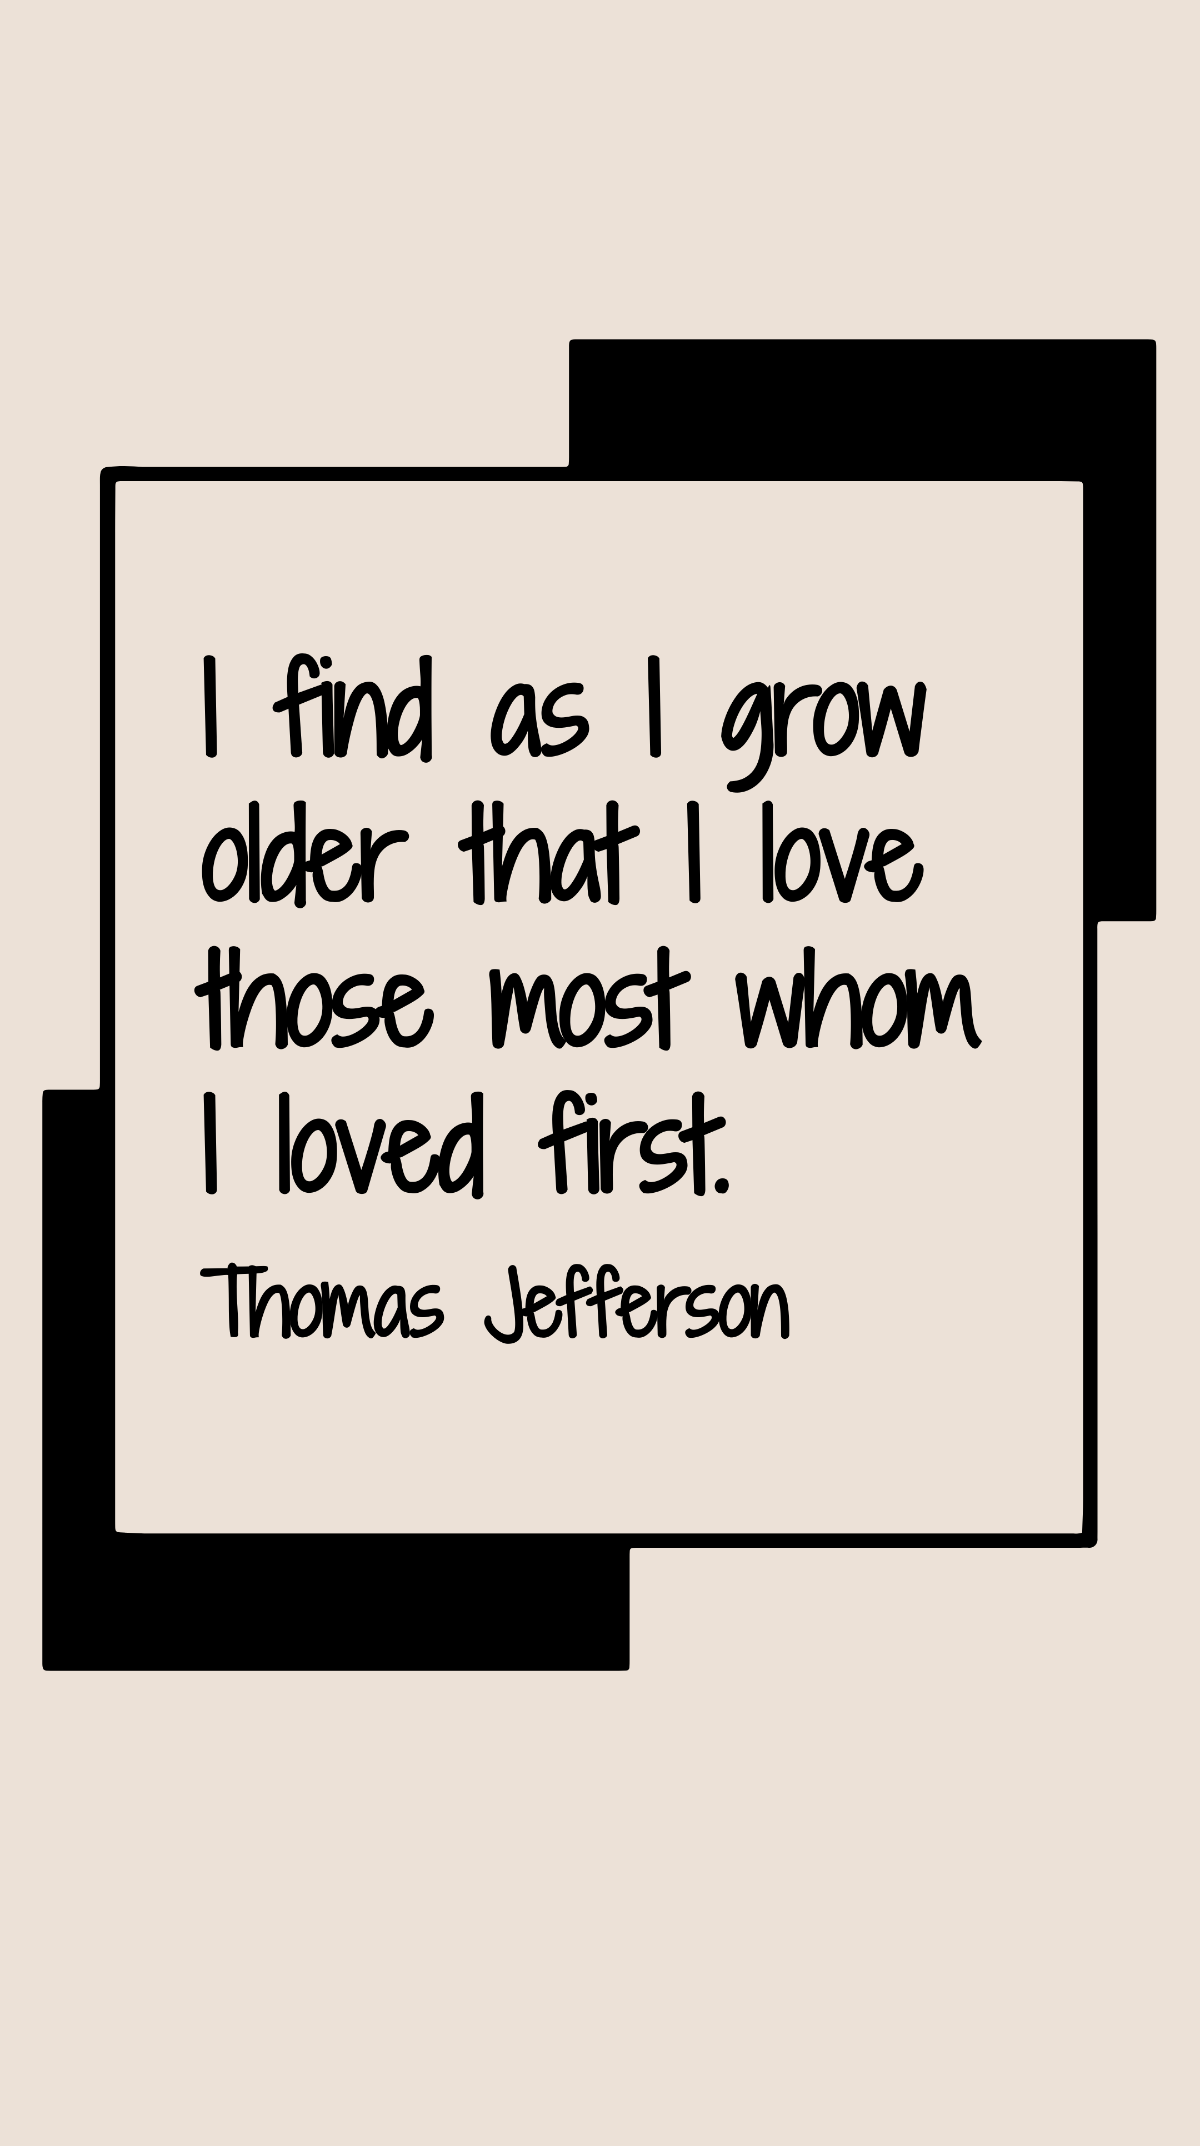 Free Thomas Jefferson - I find as I grow older that I love those most whom I loved first. Template